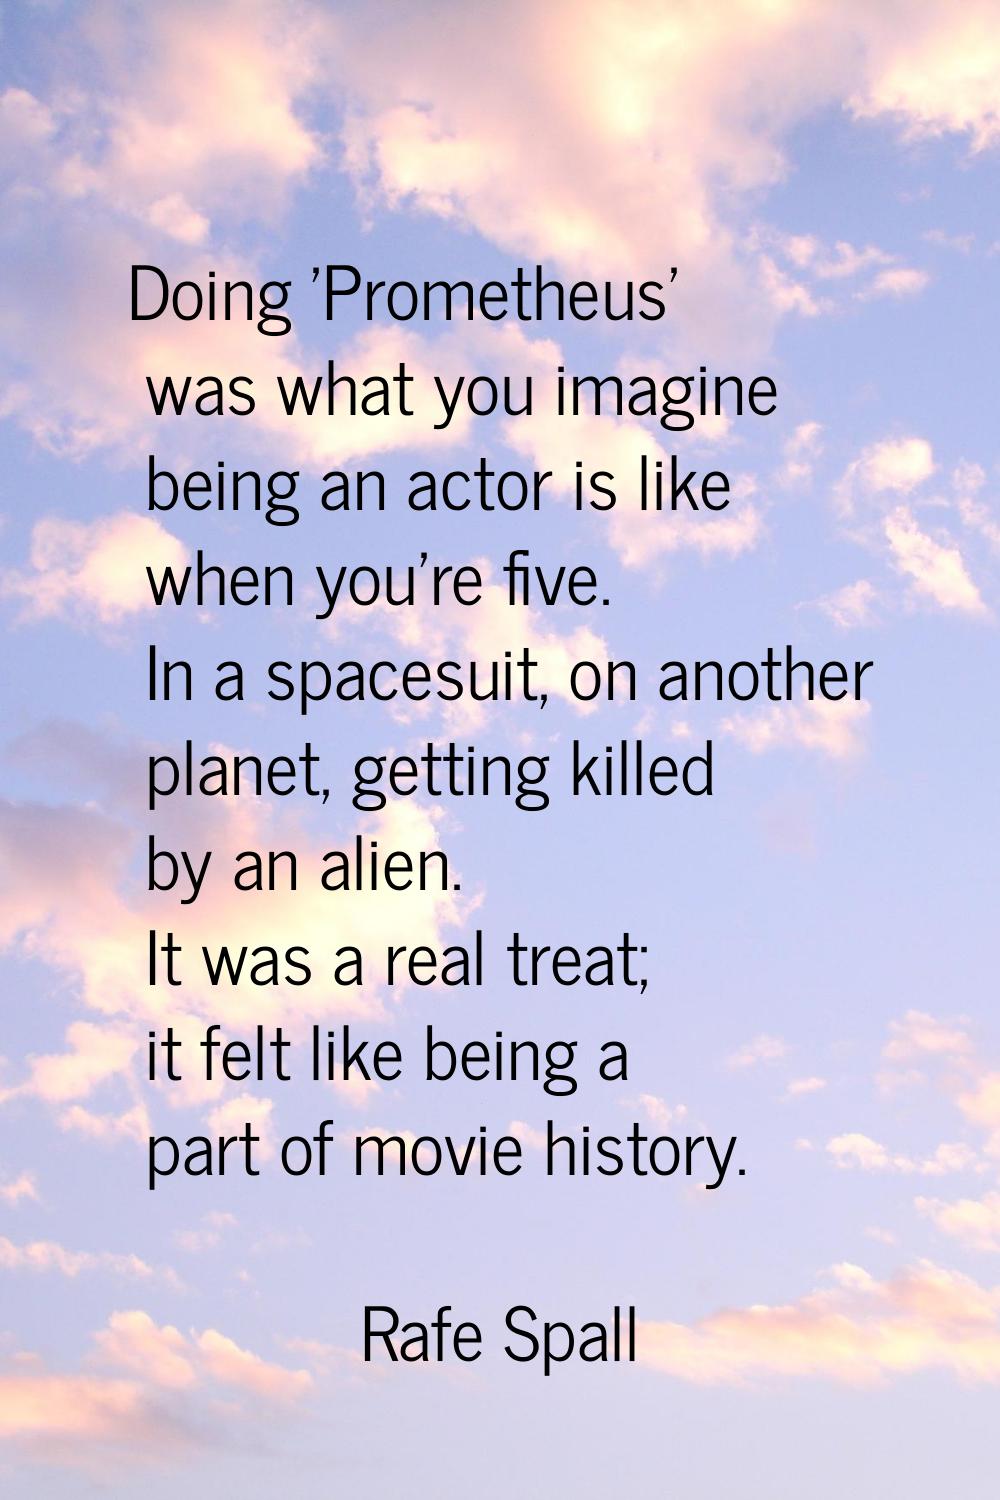 Doing 'Prometheus' was what you imagine being an actor is like when you're five. In a spacesuit, on